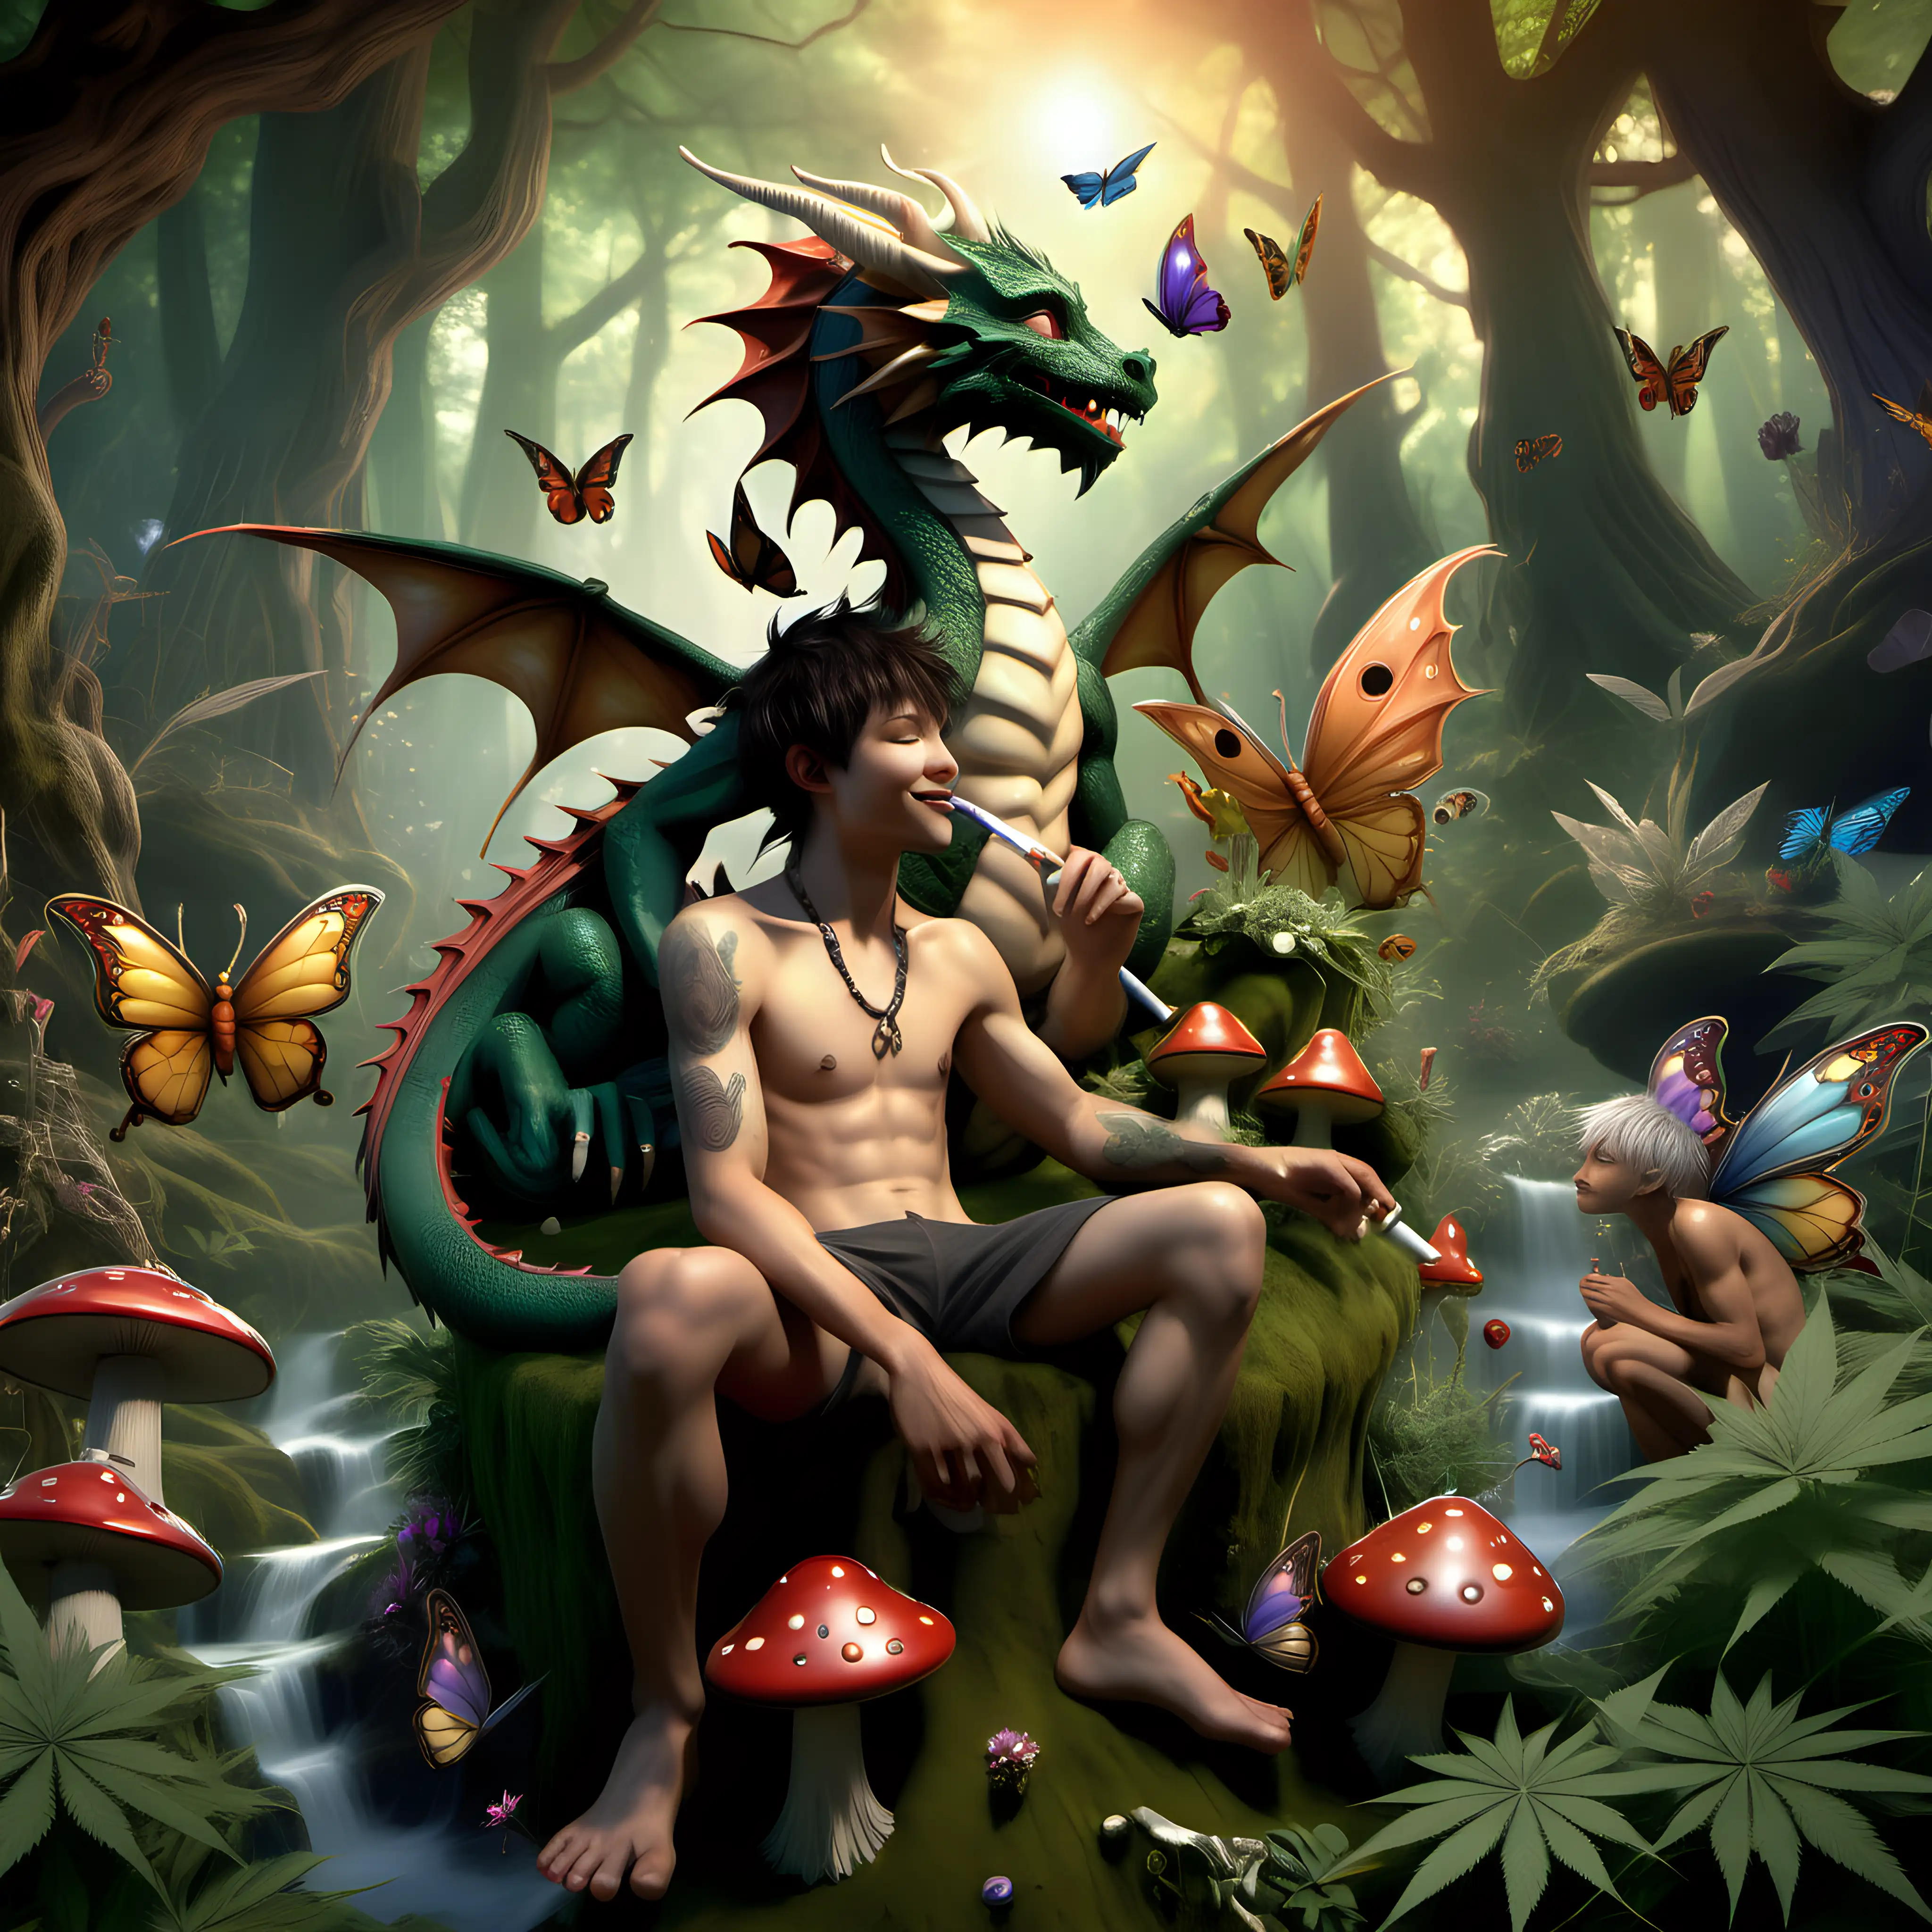 A romantic  of anthropomorphic dragon boys, cuddling, shirtless, sitting on a mushroom cap in a fantasy forest of cannabis plants, smoking an ornately carved pipe with a sleepy smile on his face. He is surrounded by pixies floating in the air and butterflies hover above them. Whisps of smoke come off the pipe. The sun is shining and the dragon boy seems very content.